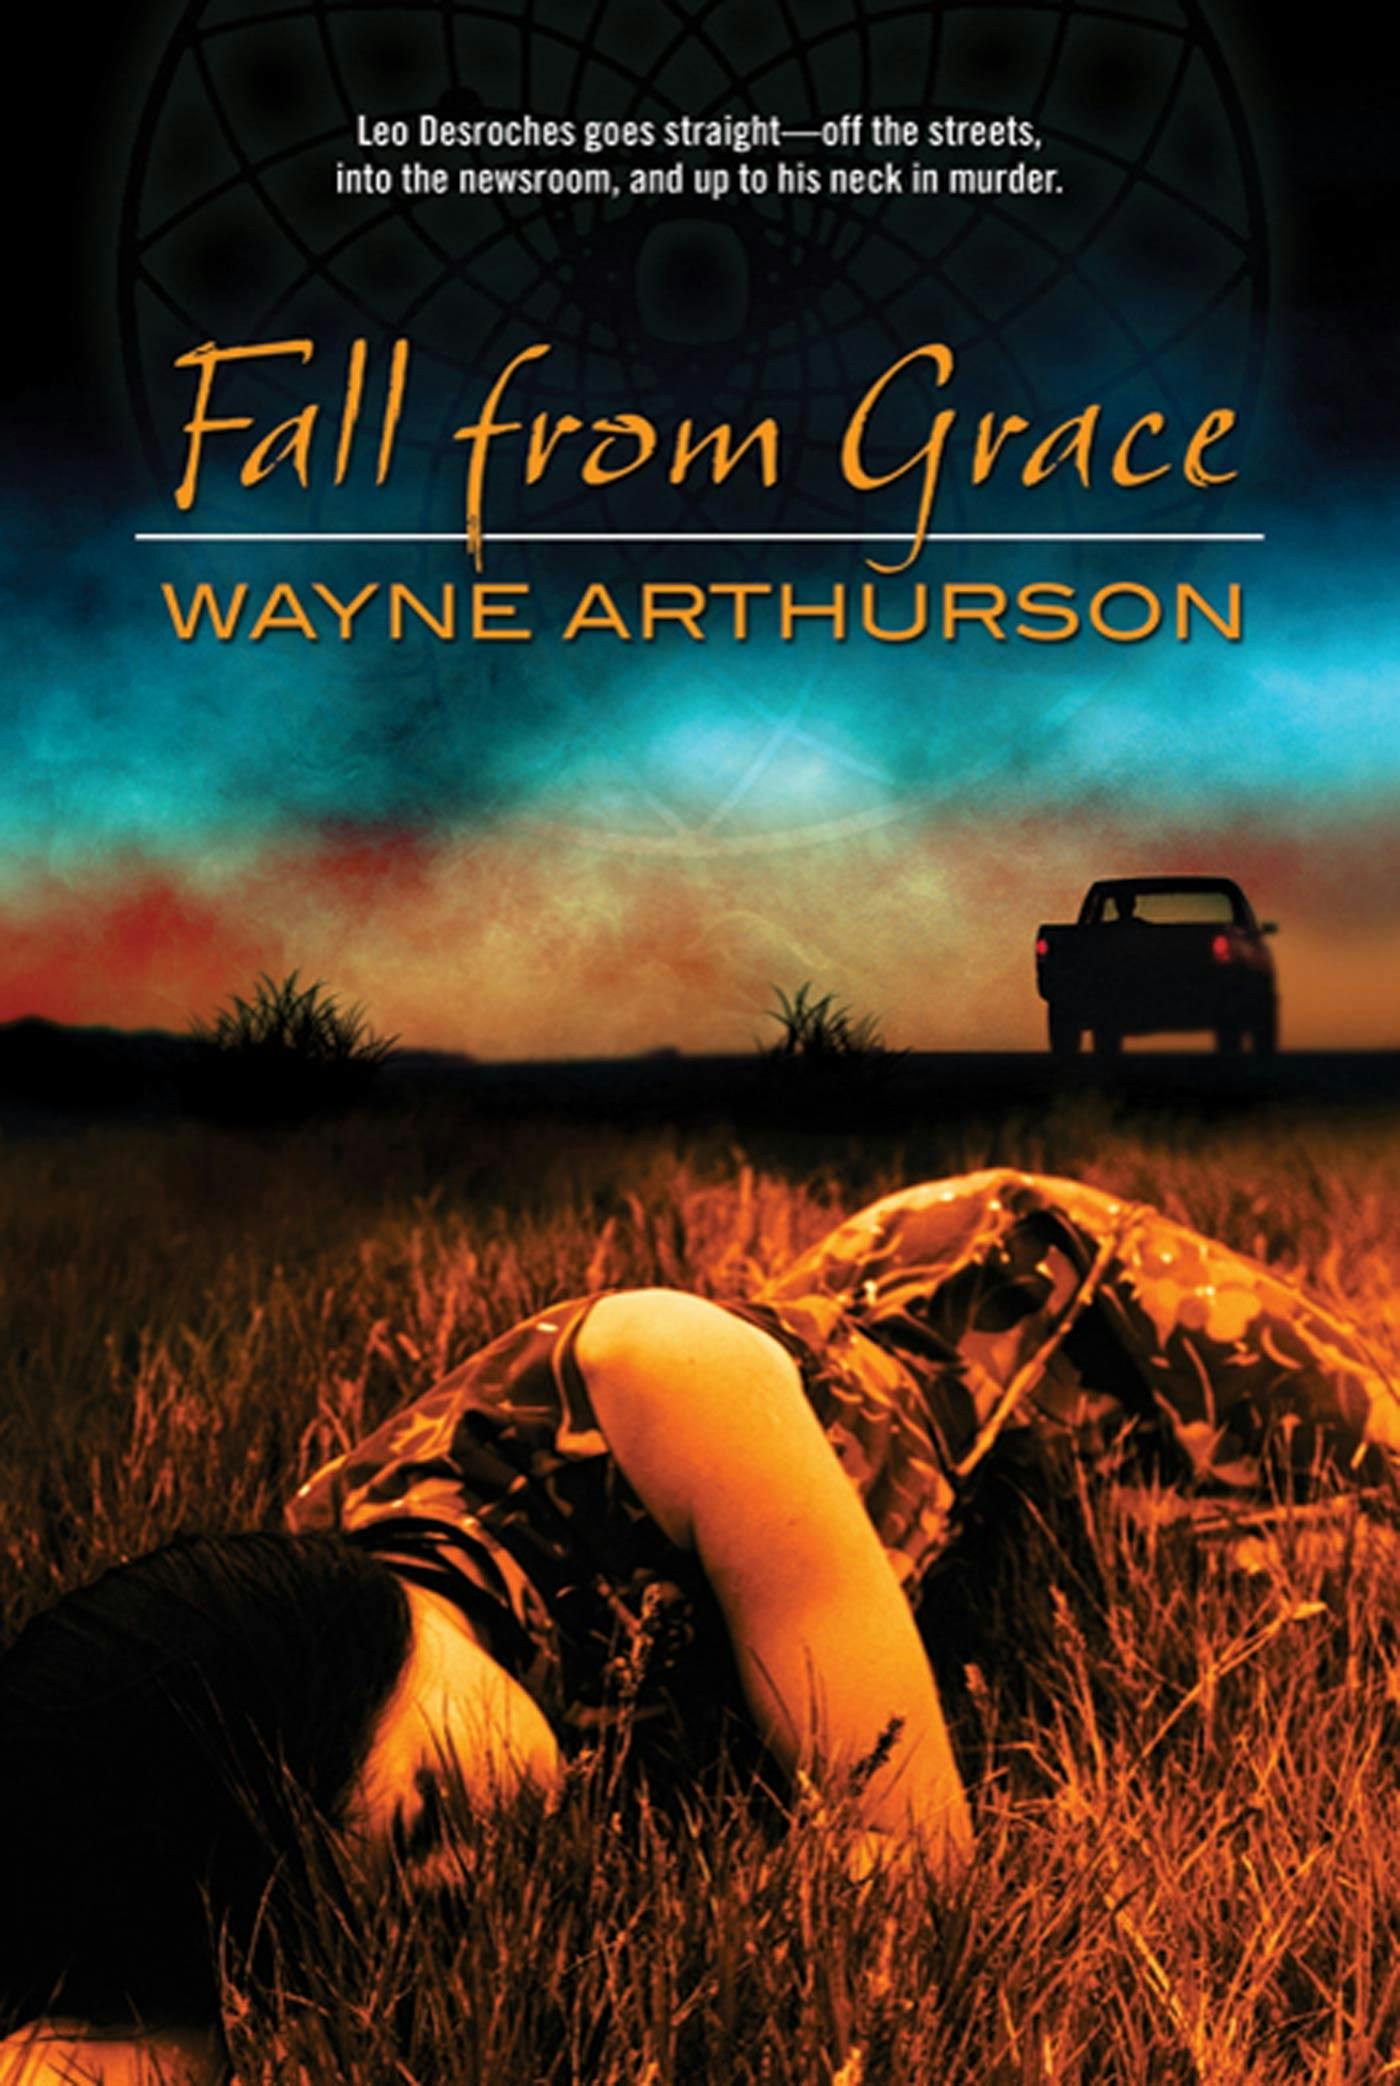 Cover for the book titled as: Fall from Grace